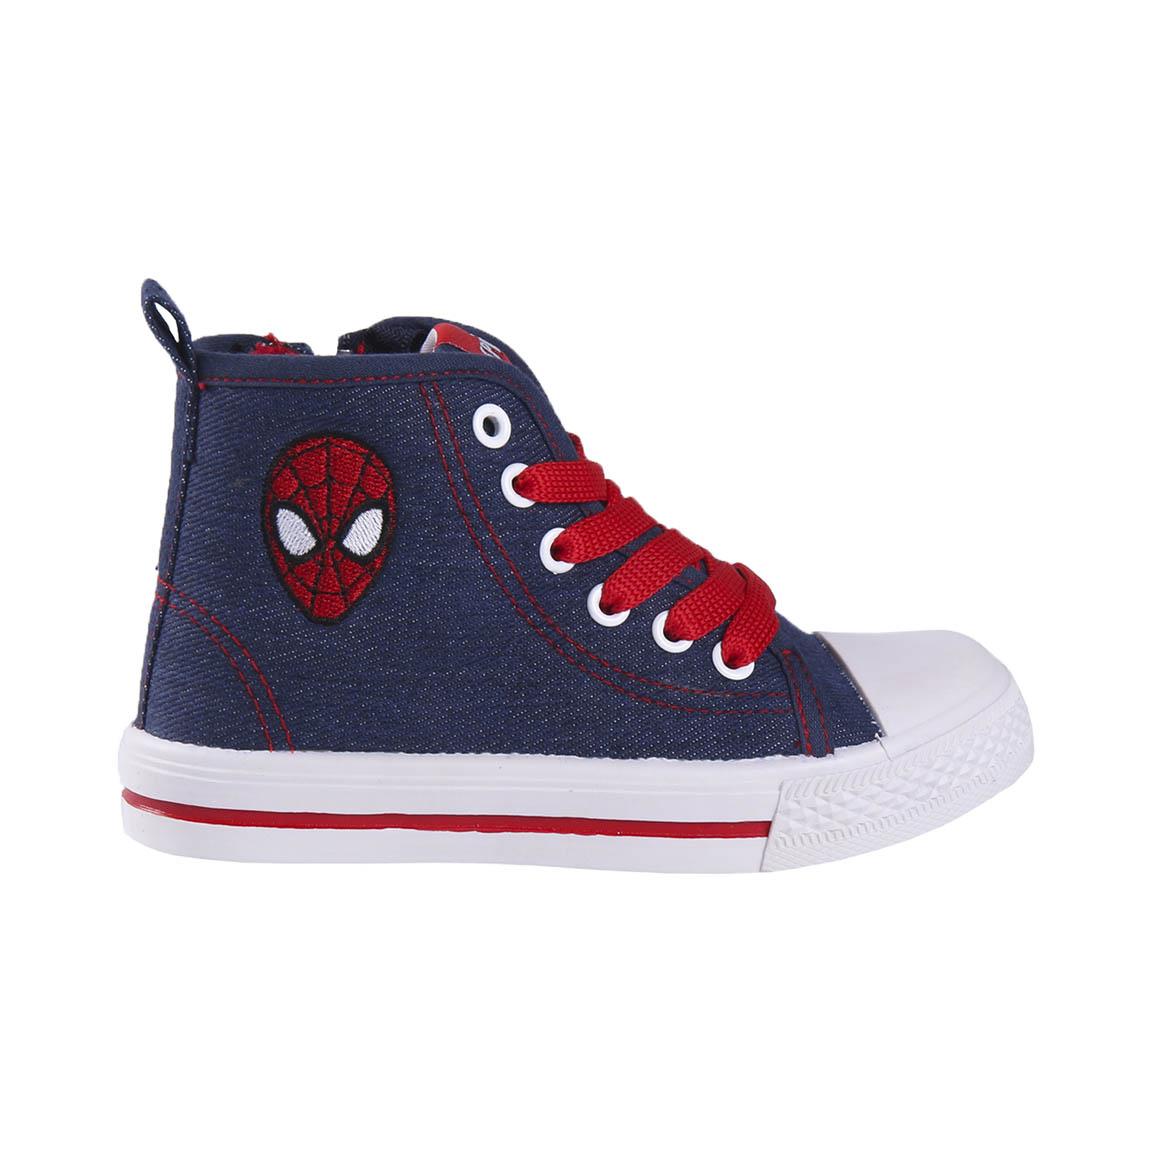 SNEAKERS PVC SOLE HIGH SPIDERMAN